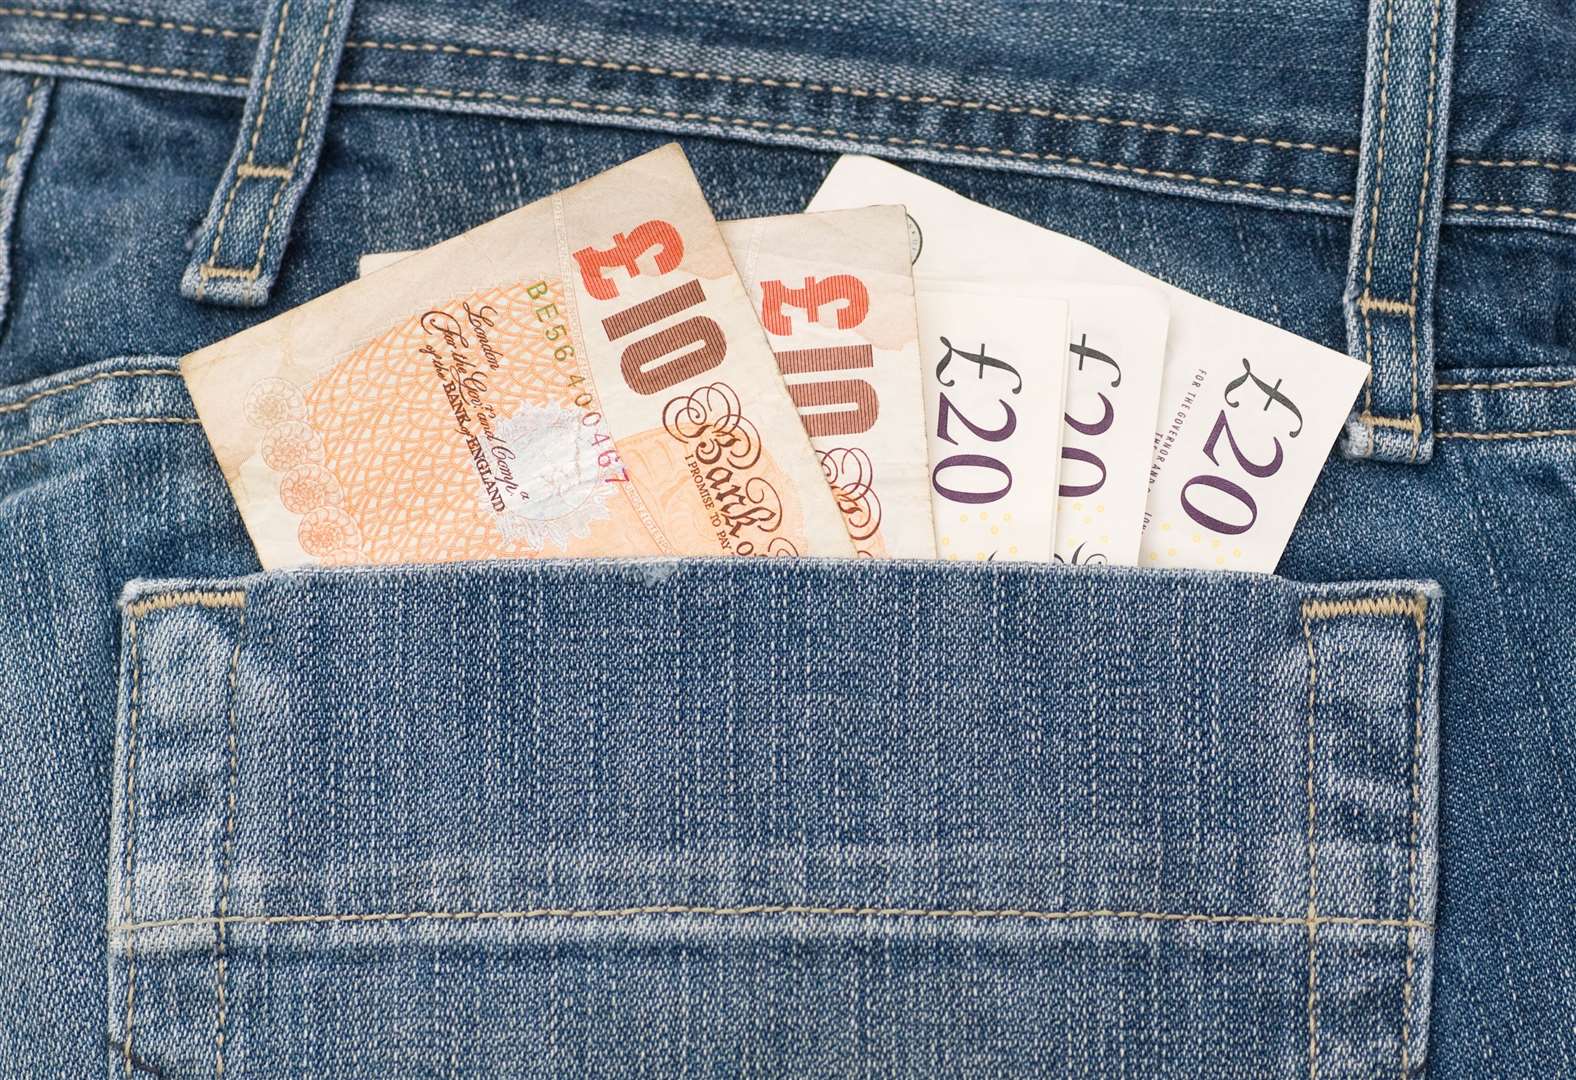 Each account has an average of £2,100 in it says HMRC. Image: iStock.